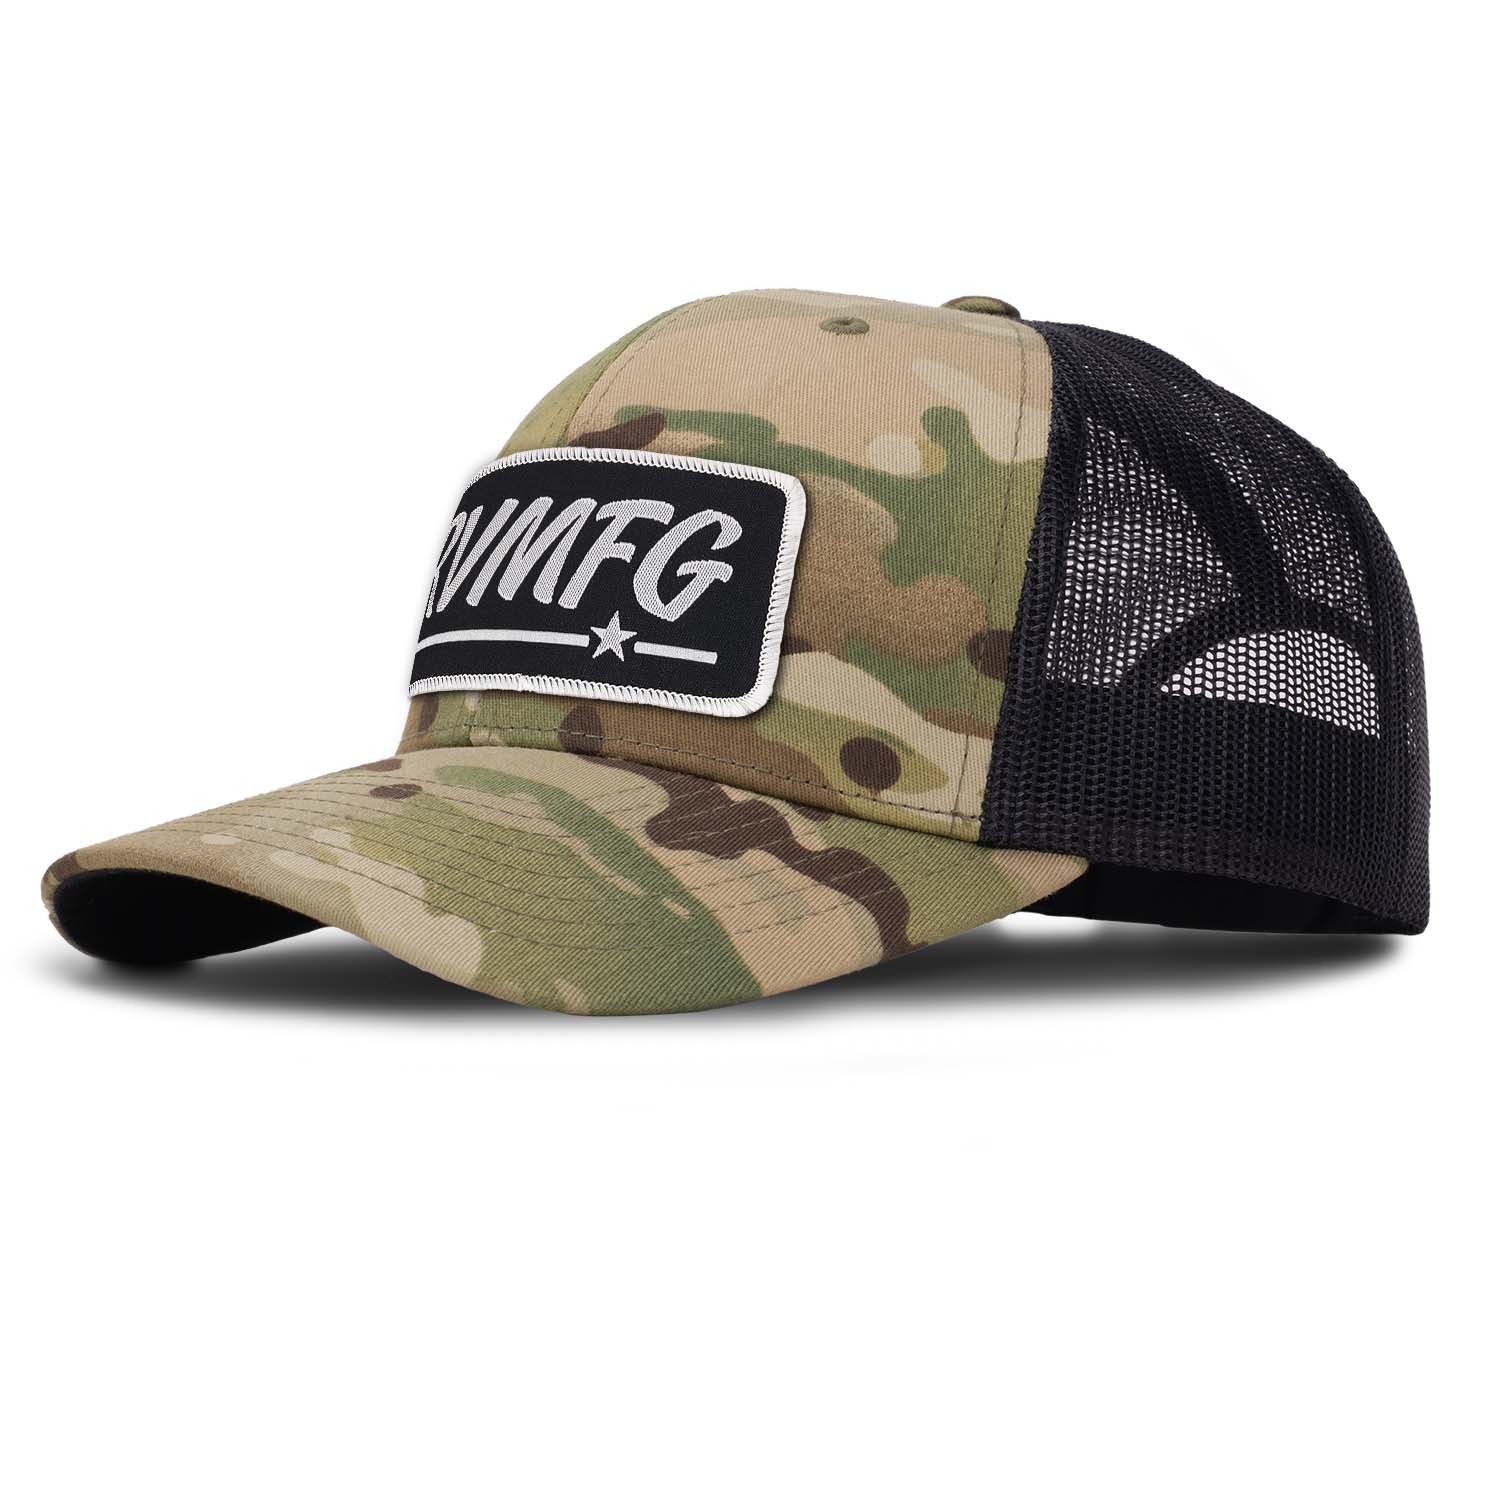 Revolution Mfg classic trucker hat in multicam camo with black mesh with a black woven RVMFG patch with white letters and a white border